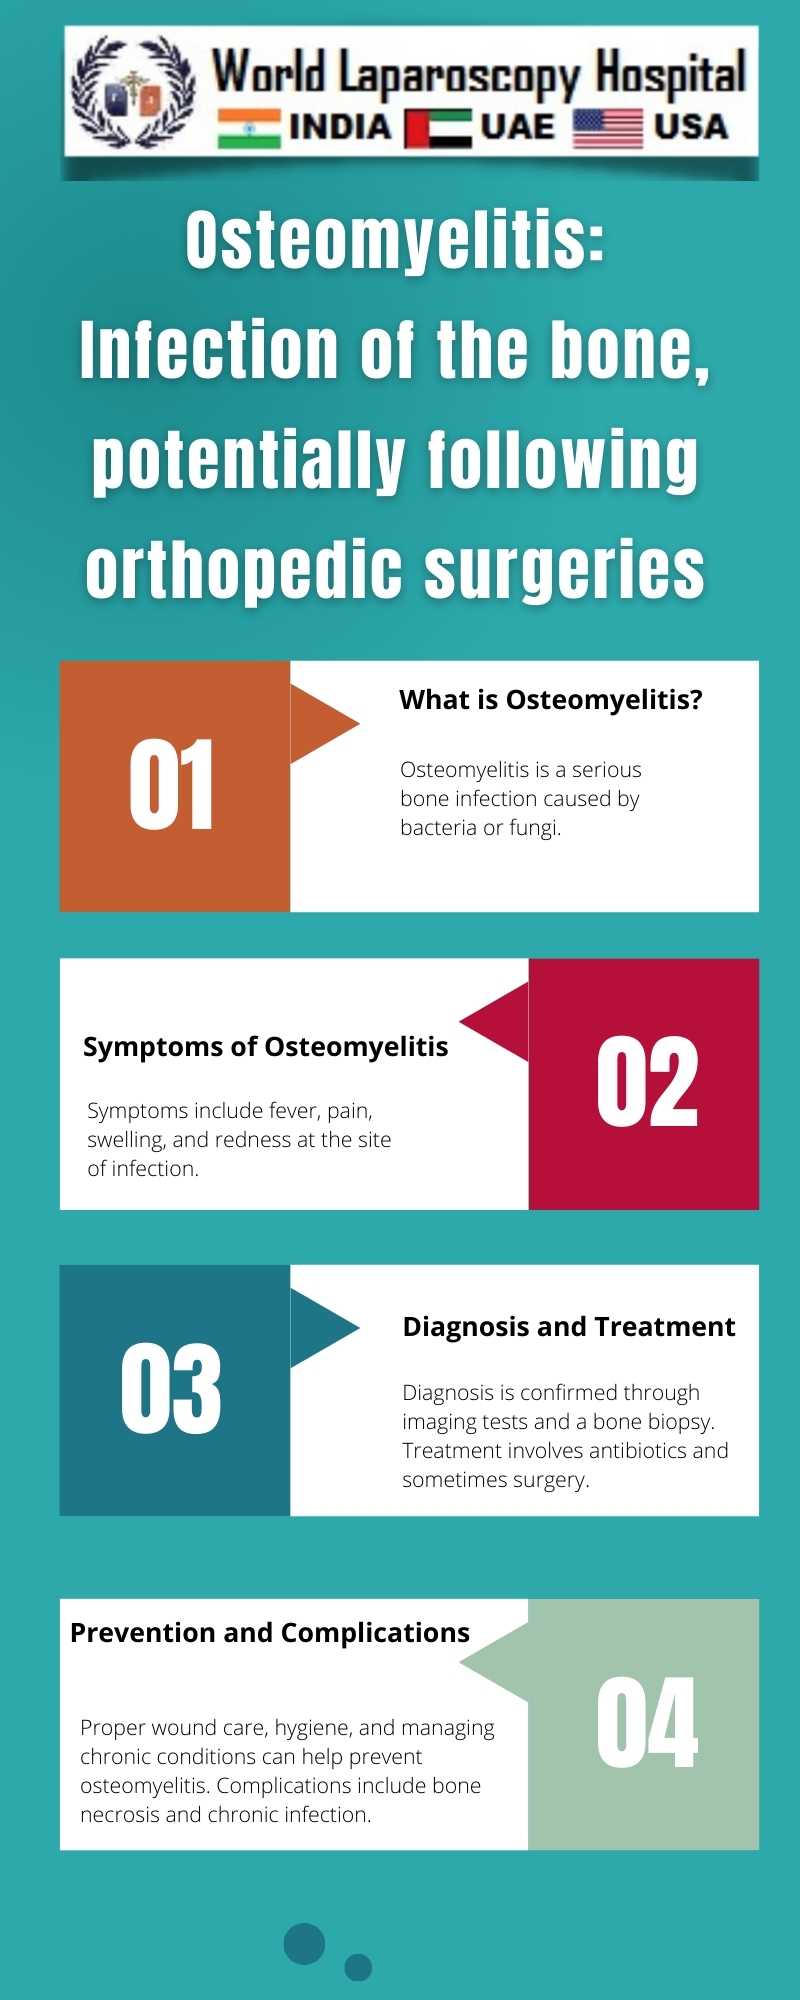 Osteomyelitis: Infection of the bone, potentially following orthopedic surgeries